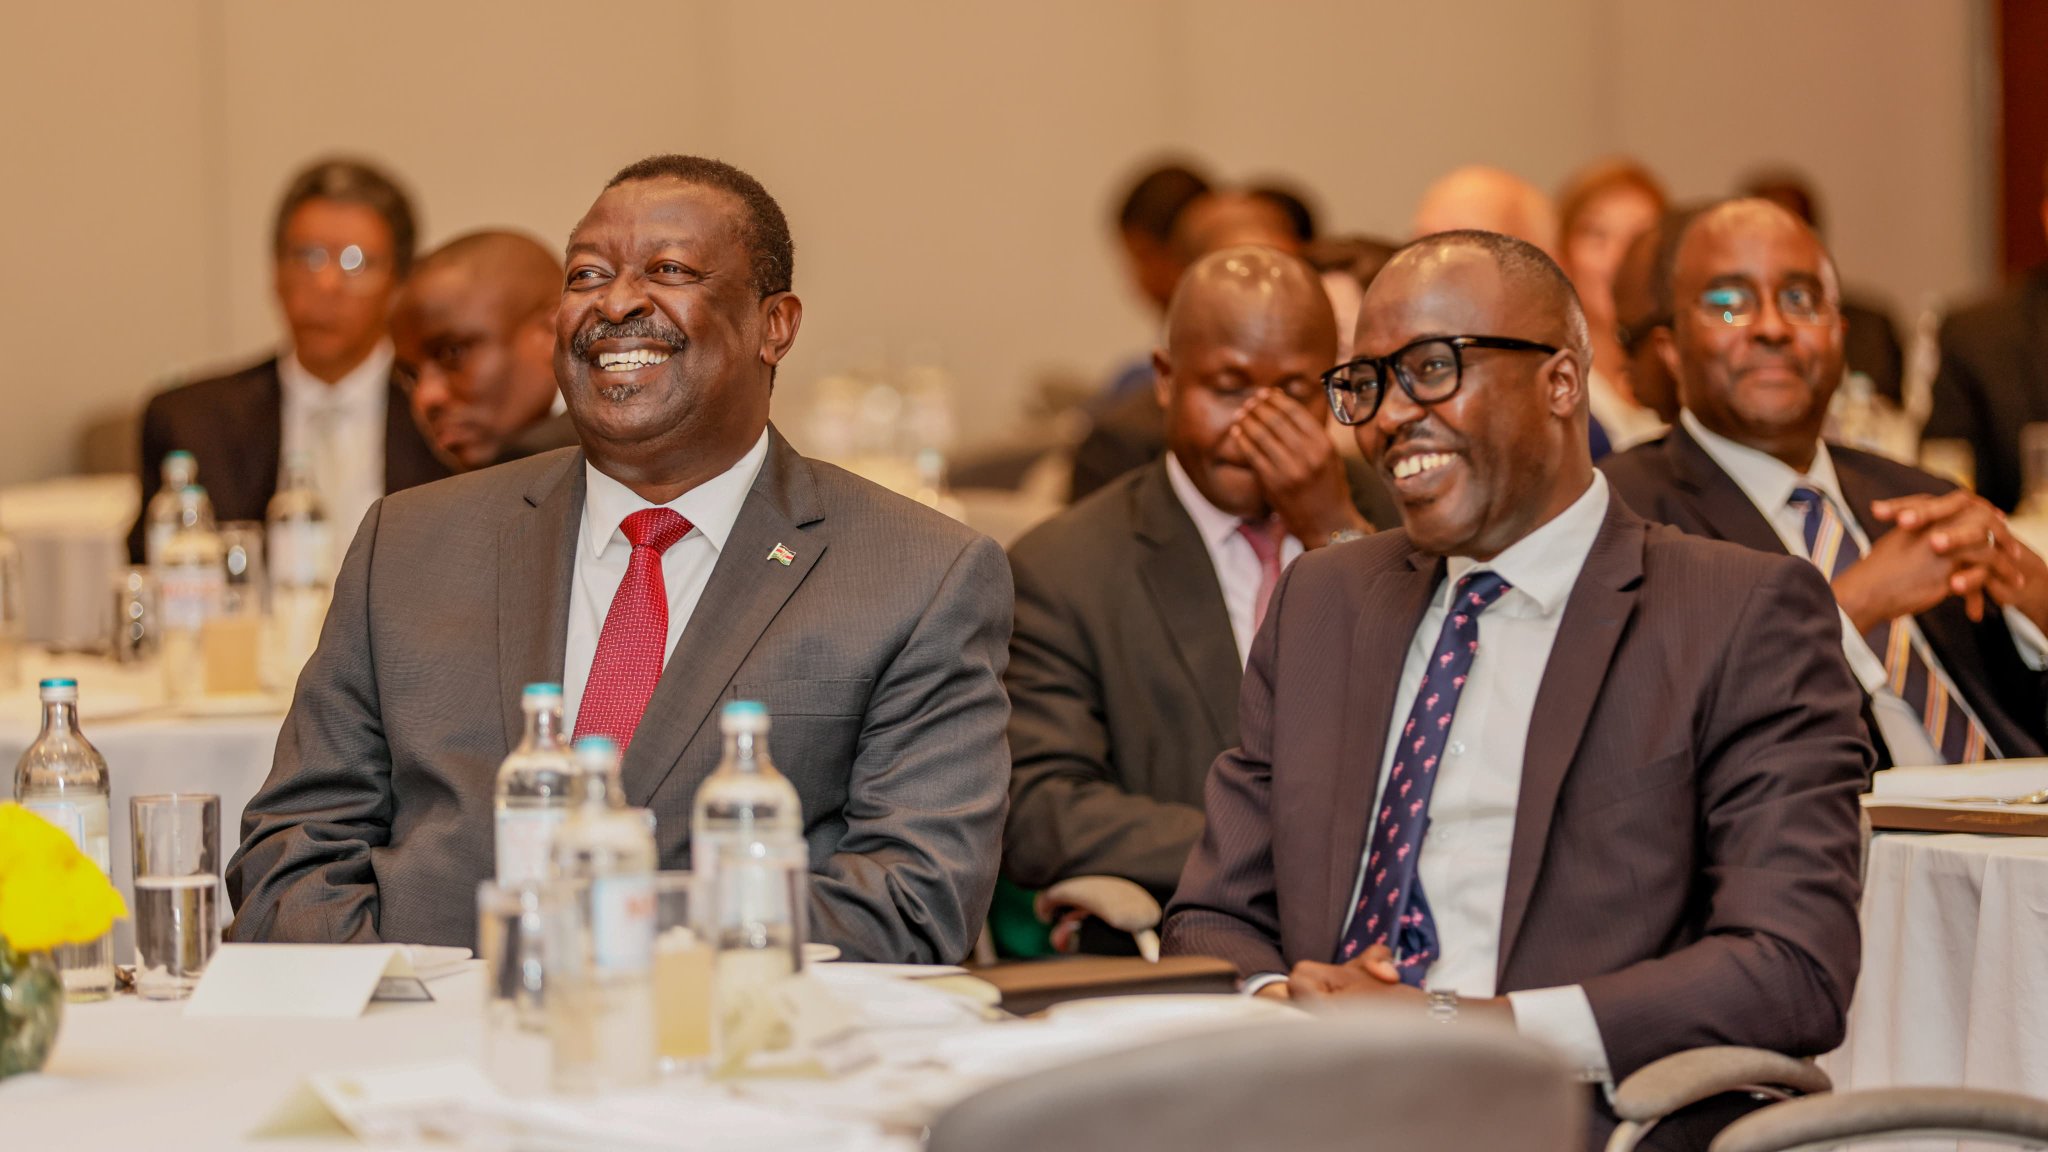 PCS Mudavadi and Foreign Affairs PS Korir SingOei during a diplomatic luncheon for heads of foreign missions in Kenya.